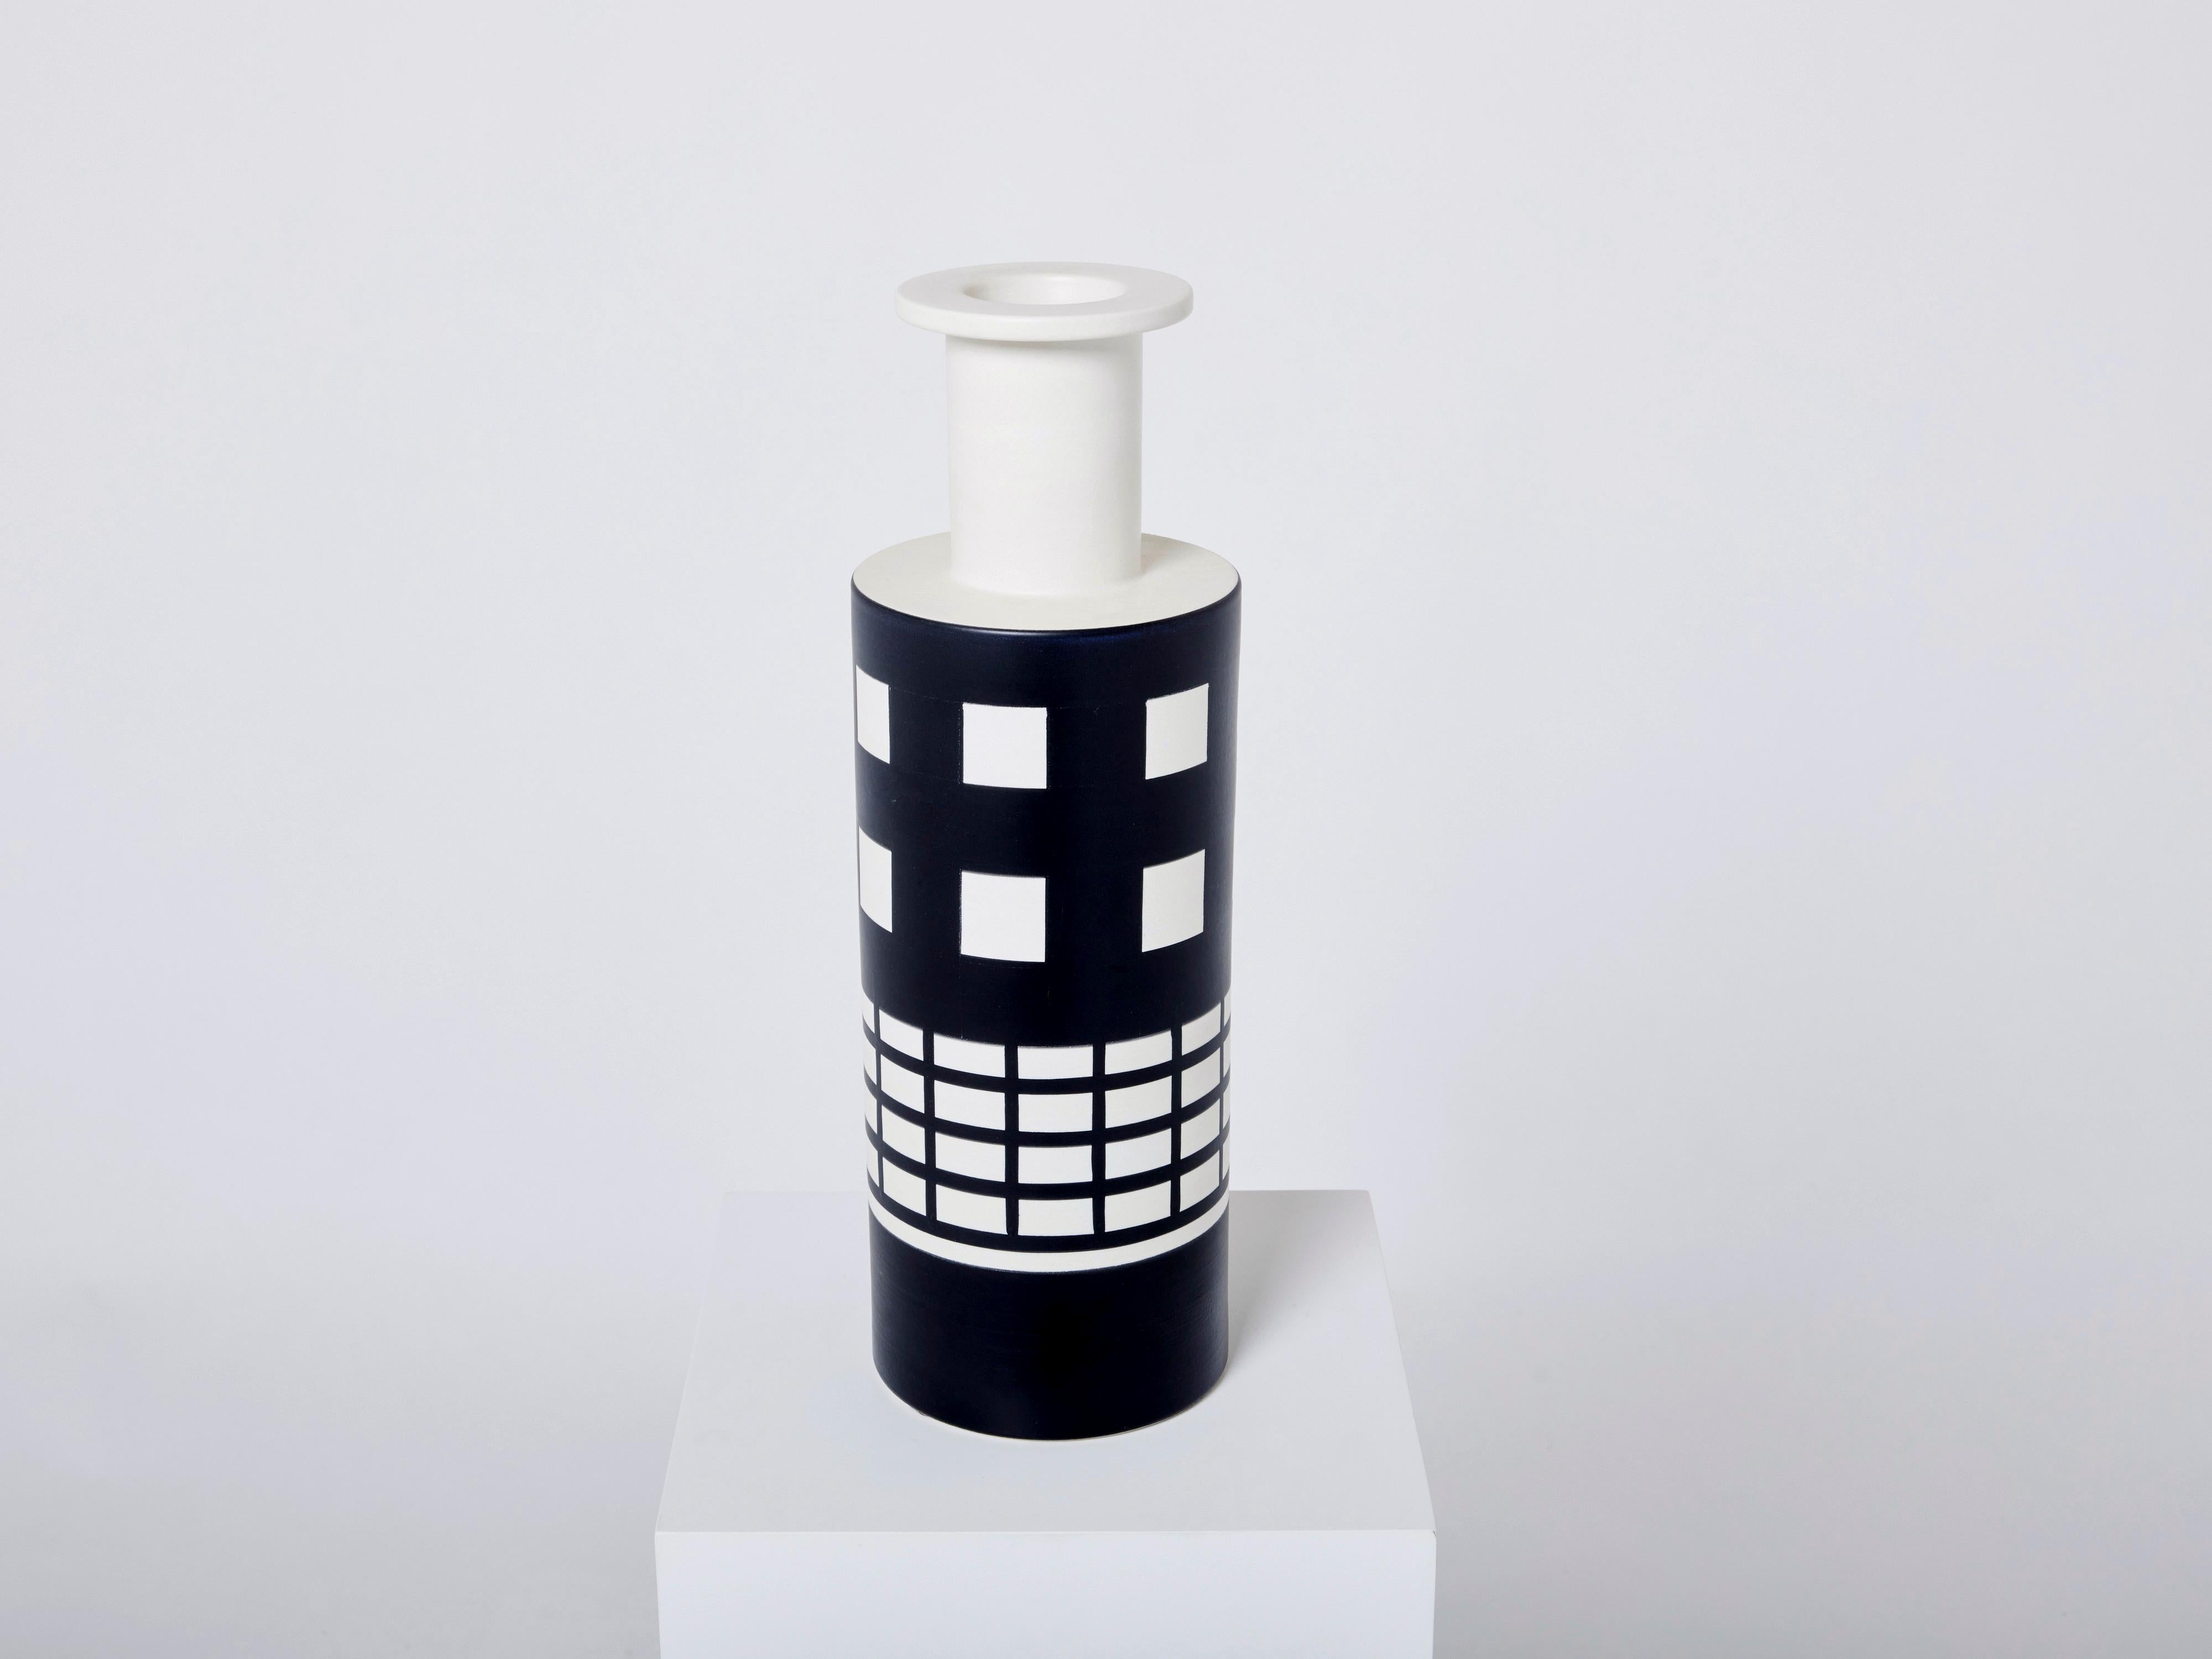 Beautiful black and white graphic ceramic vase, bottle shaped, designed by Ettore Sottsass for Bitossi Montelupo in 1986. This beautiful vase, typical of Ettore Sottsass avant-garde design, is a true collectible piece. Marked E. Sottsass, Bitossi -